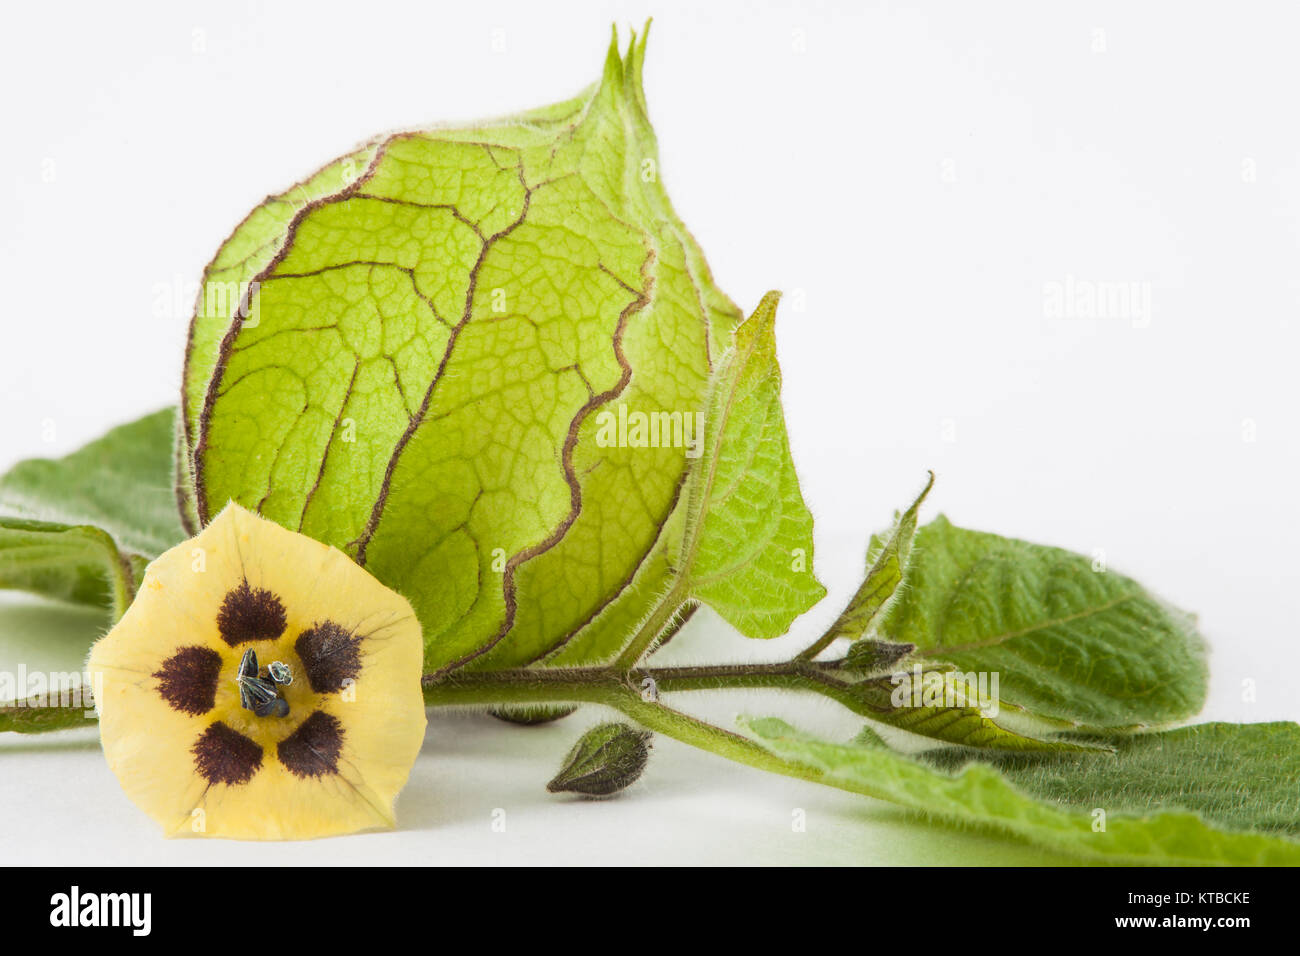 Cape gooseberry flower and calyx  (Physalis peruviana) on white background Stock Photo